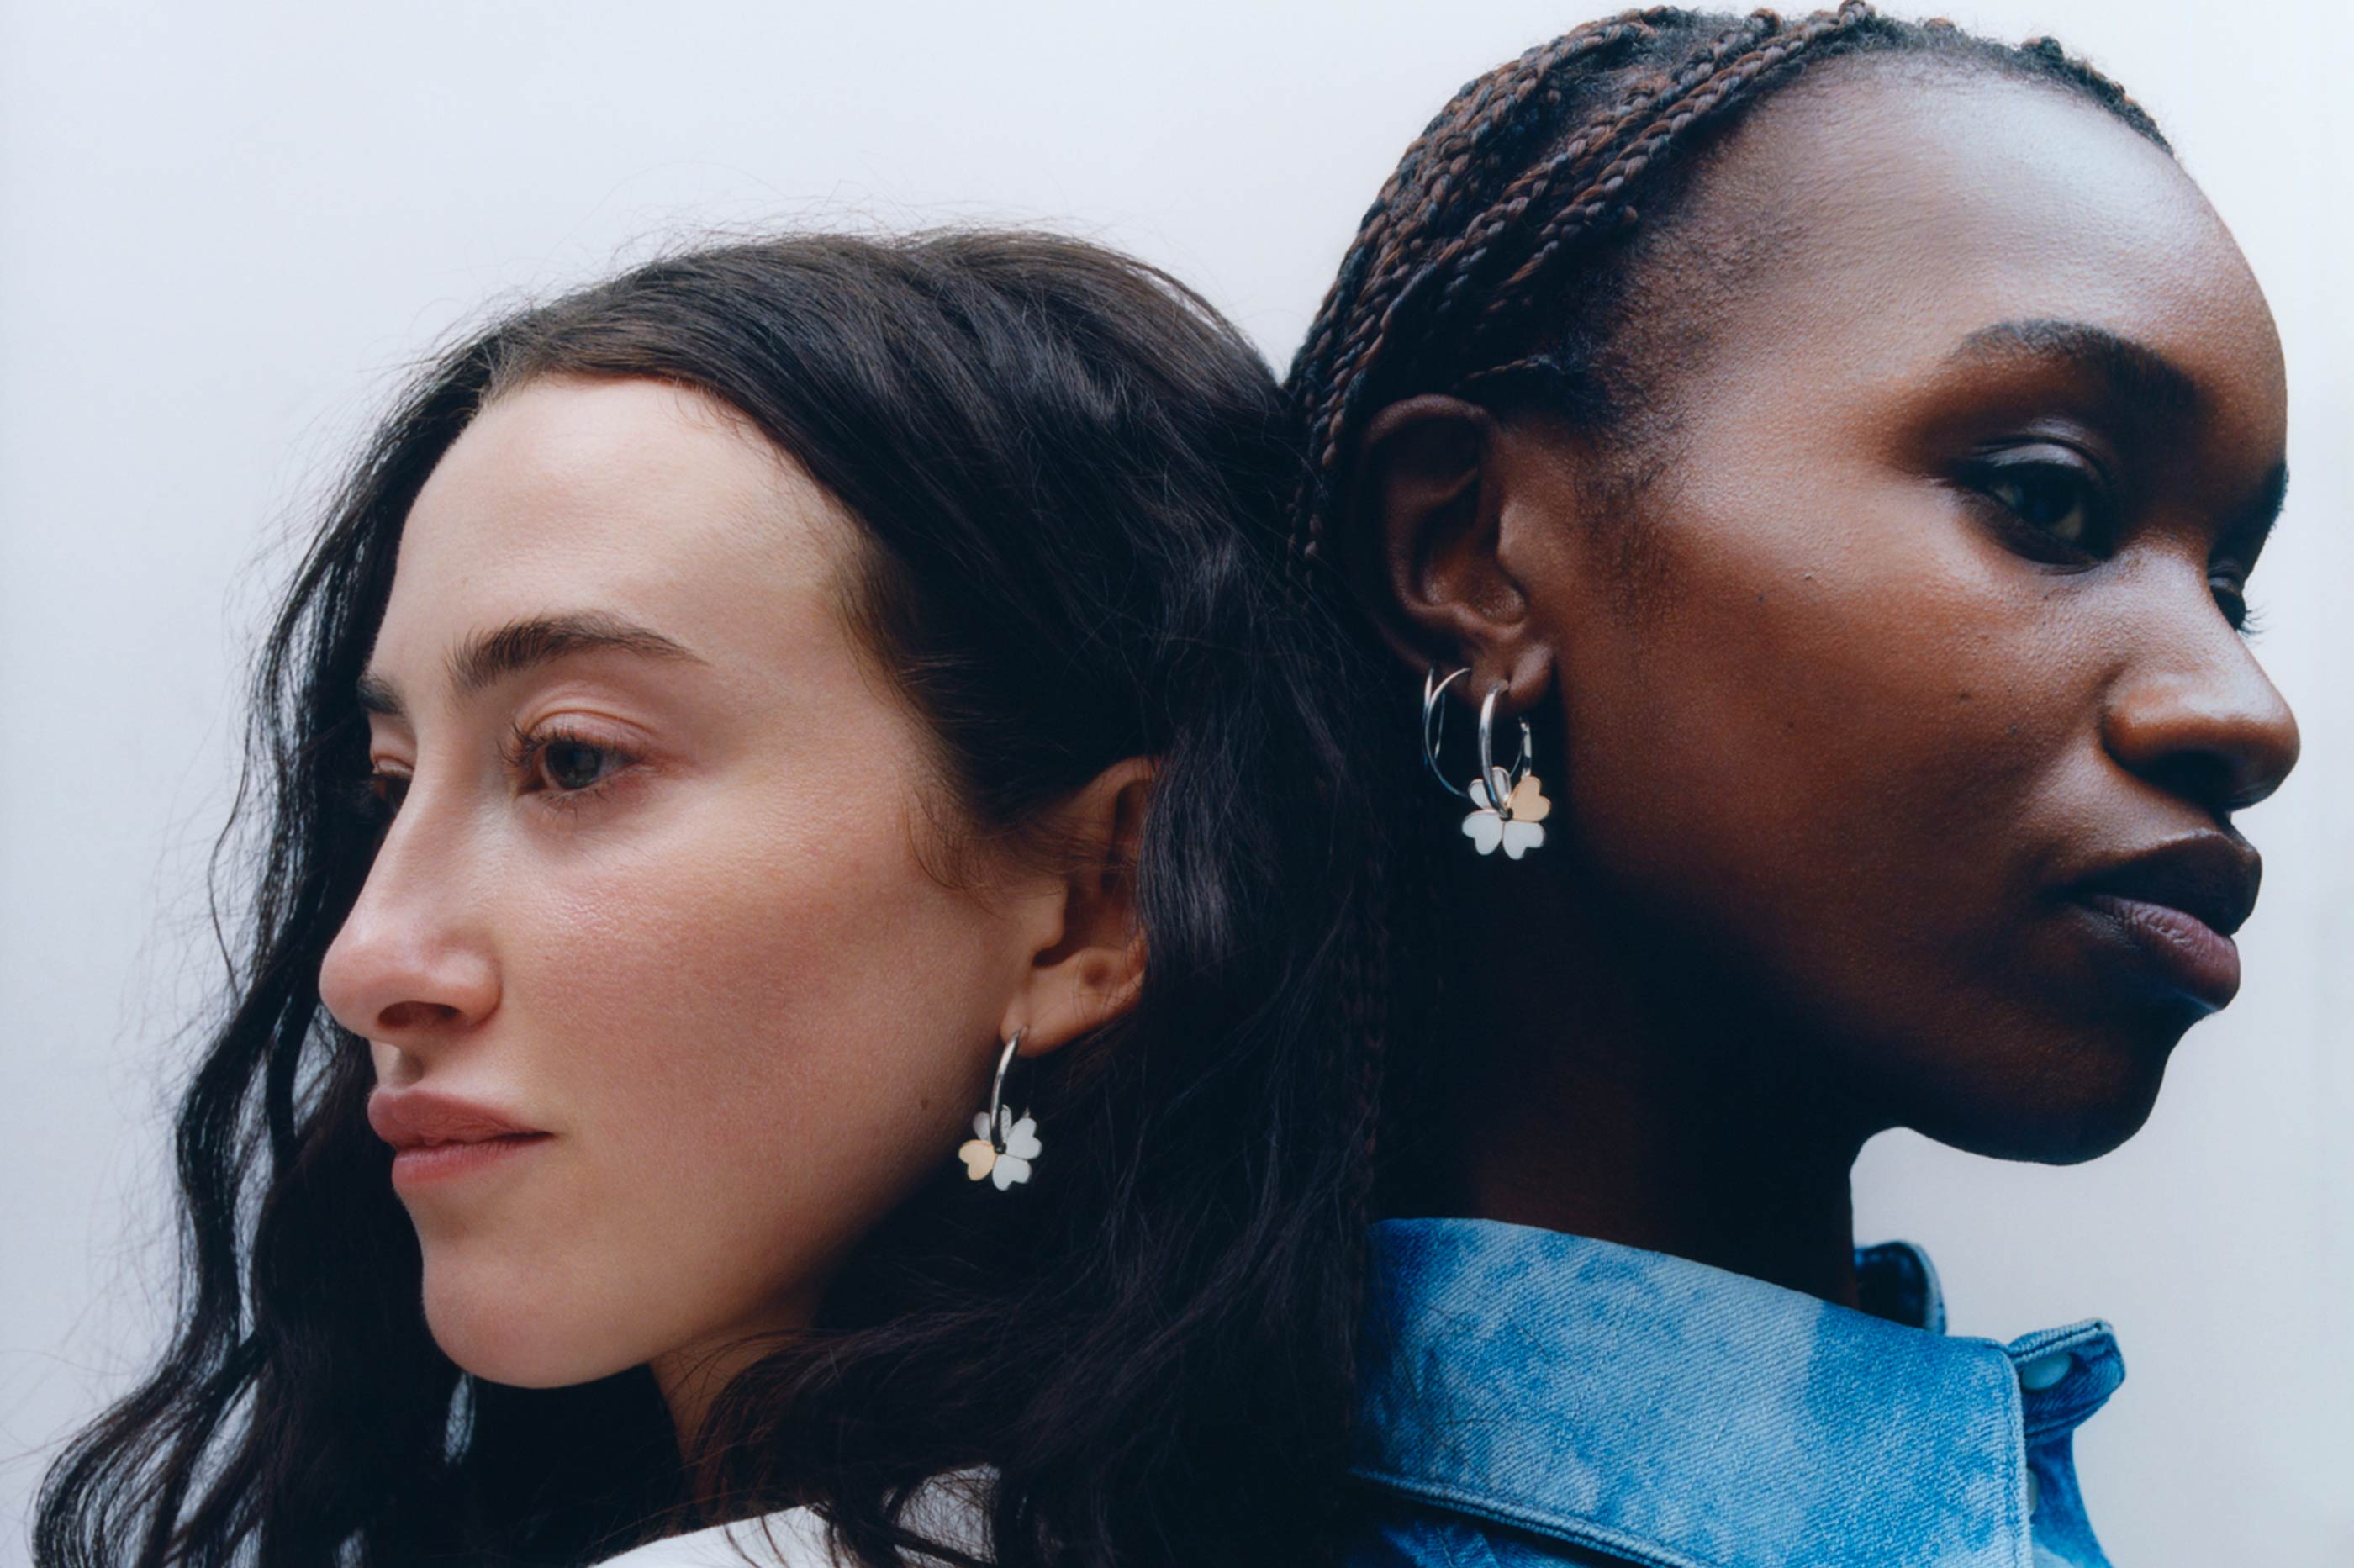 GANNI and Mejuri collaborate on a limited-edition jewellery collection